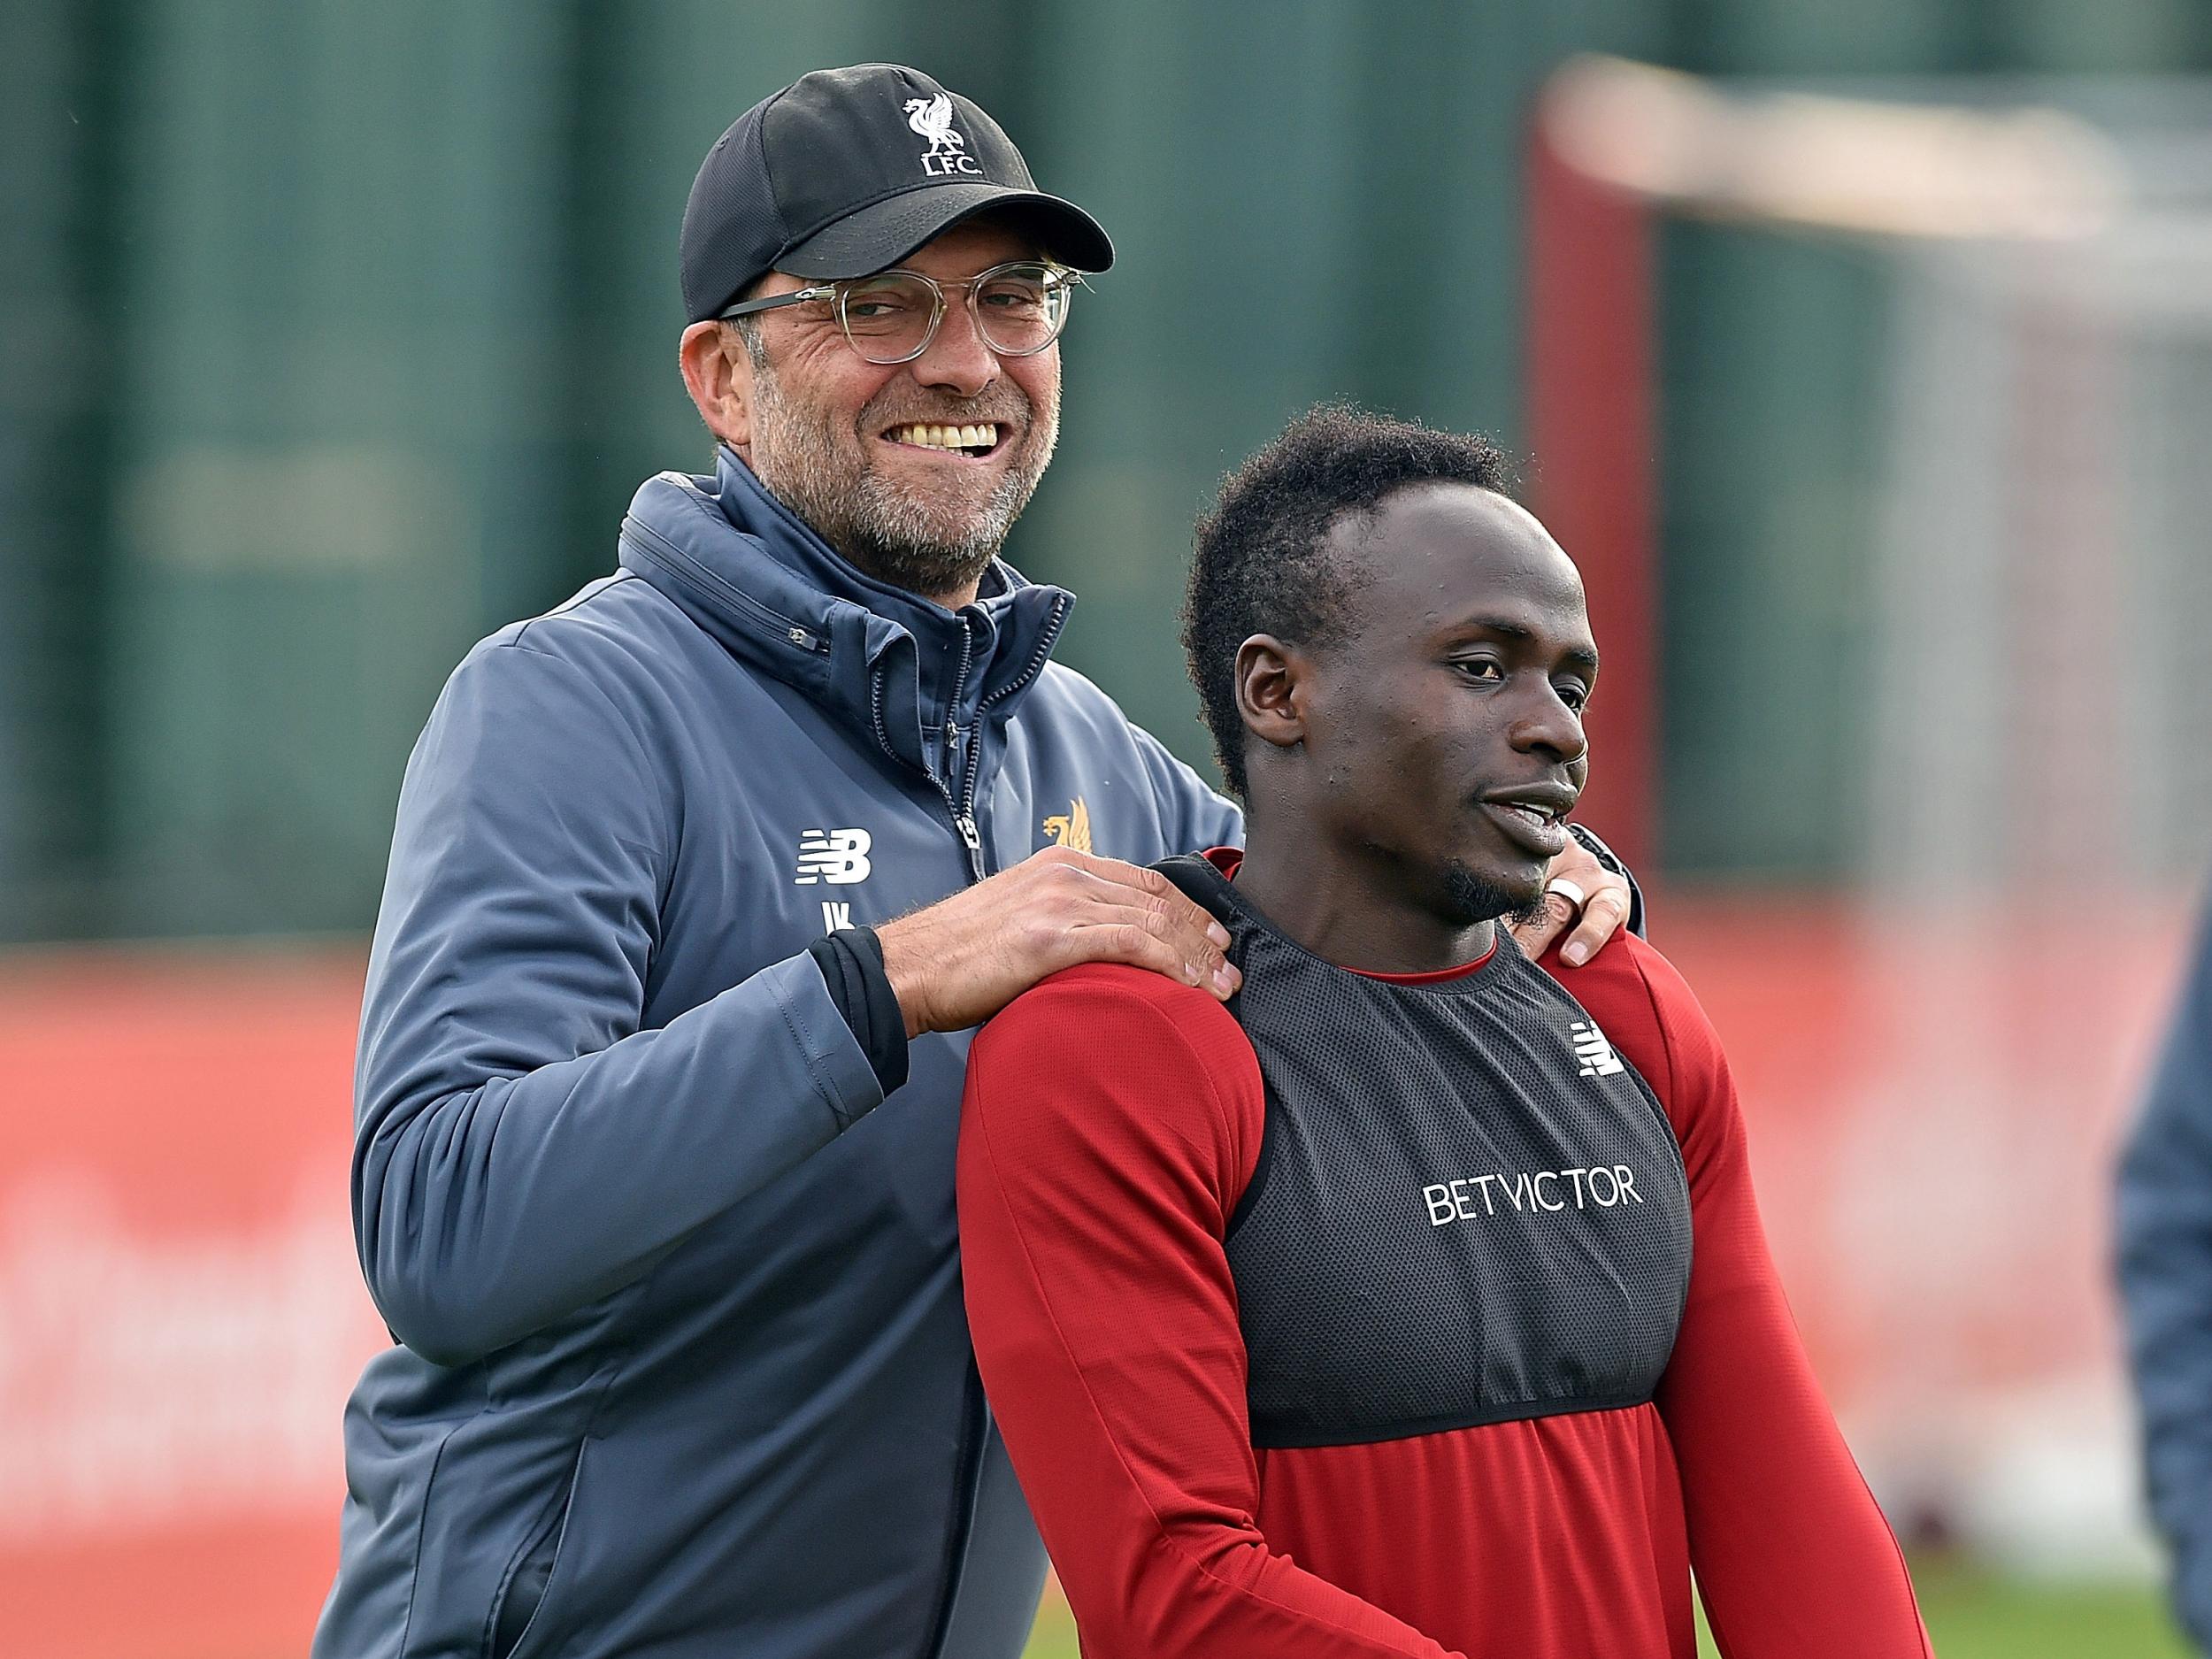 Sadio Mané is one of Jurgen Klopp's most important players at Liverpool